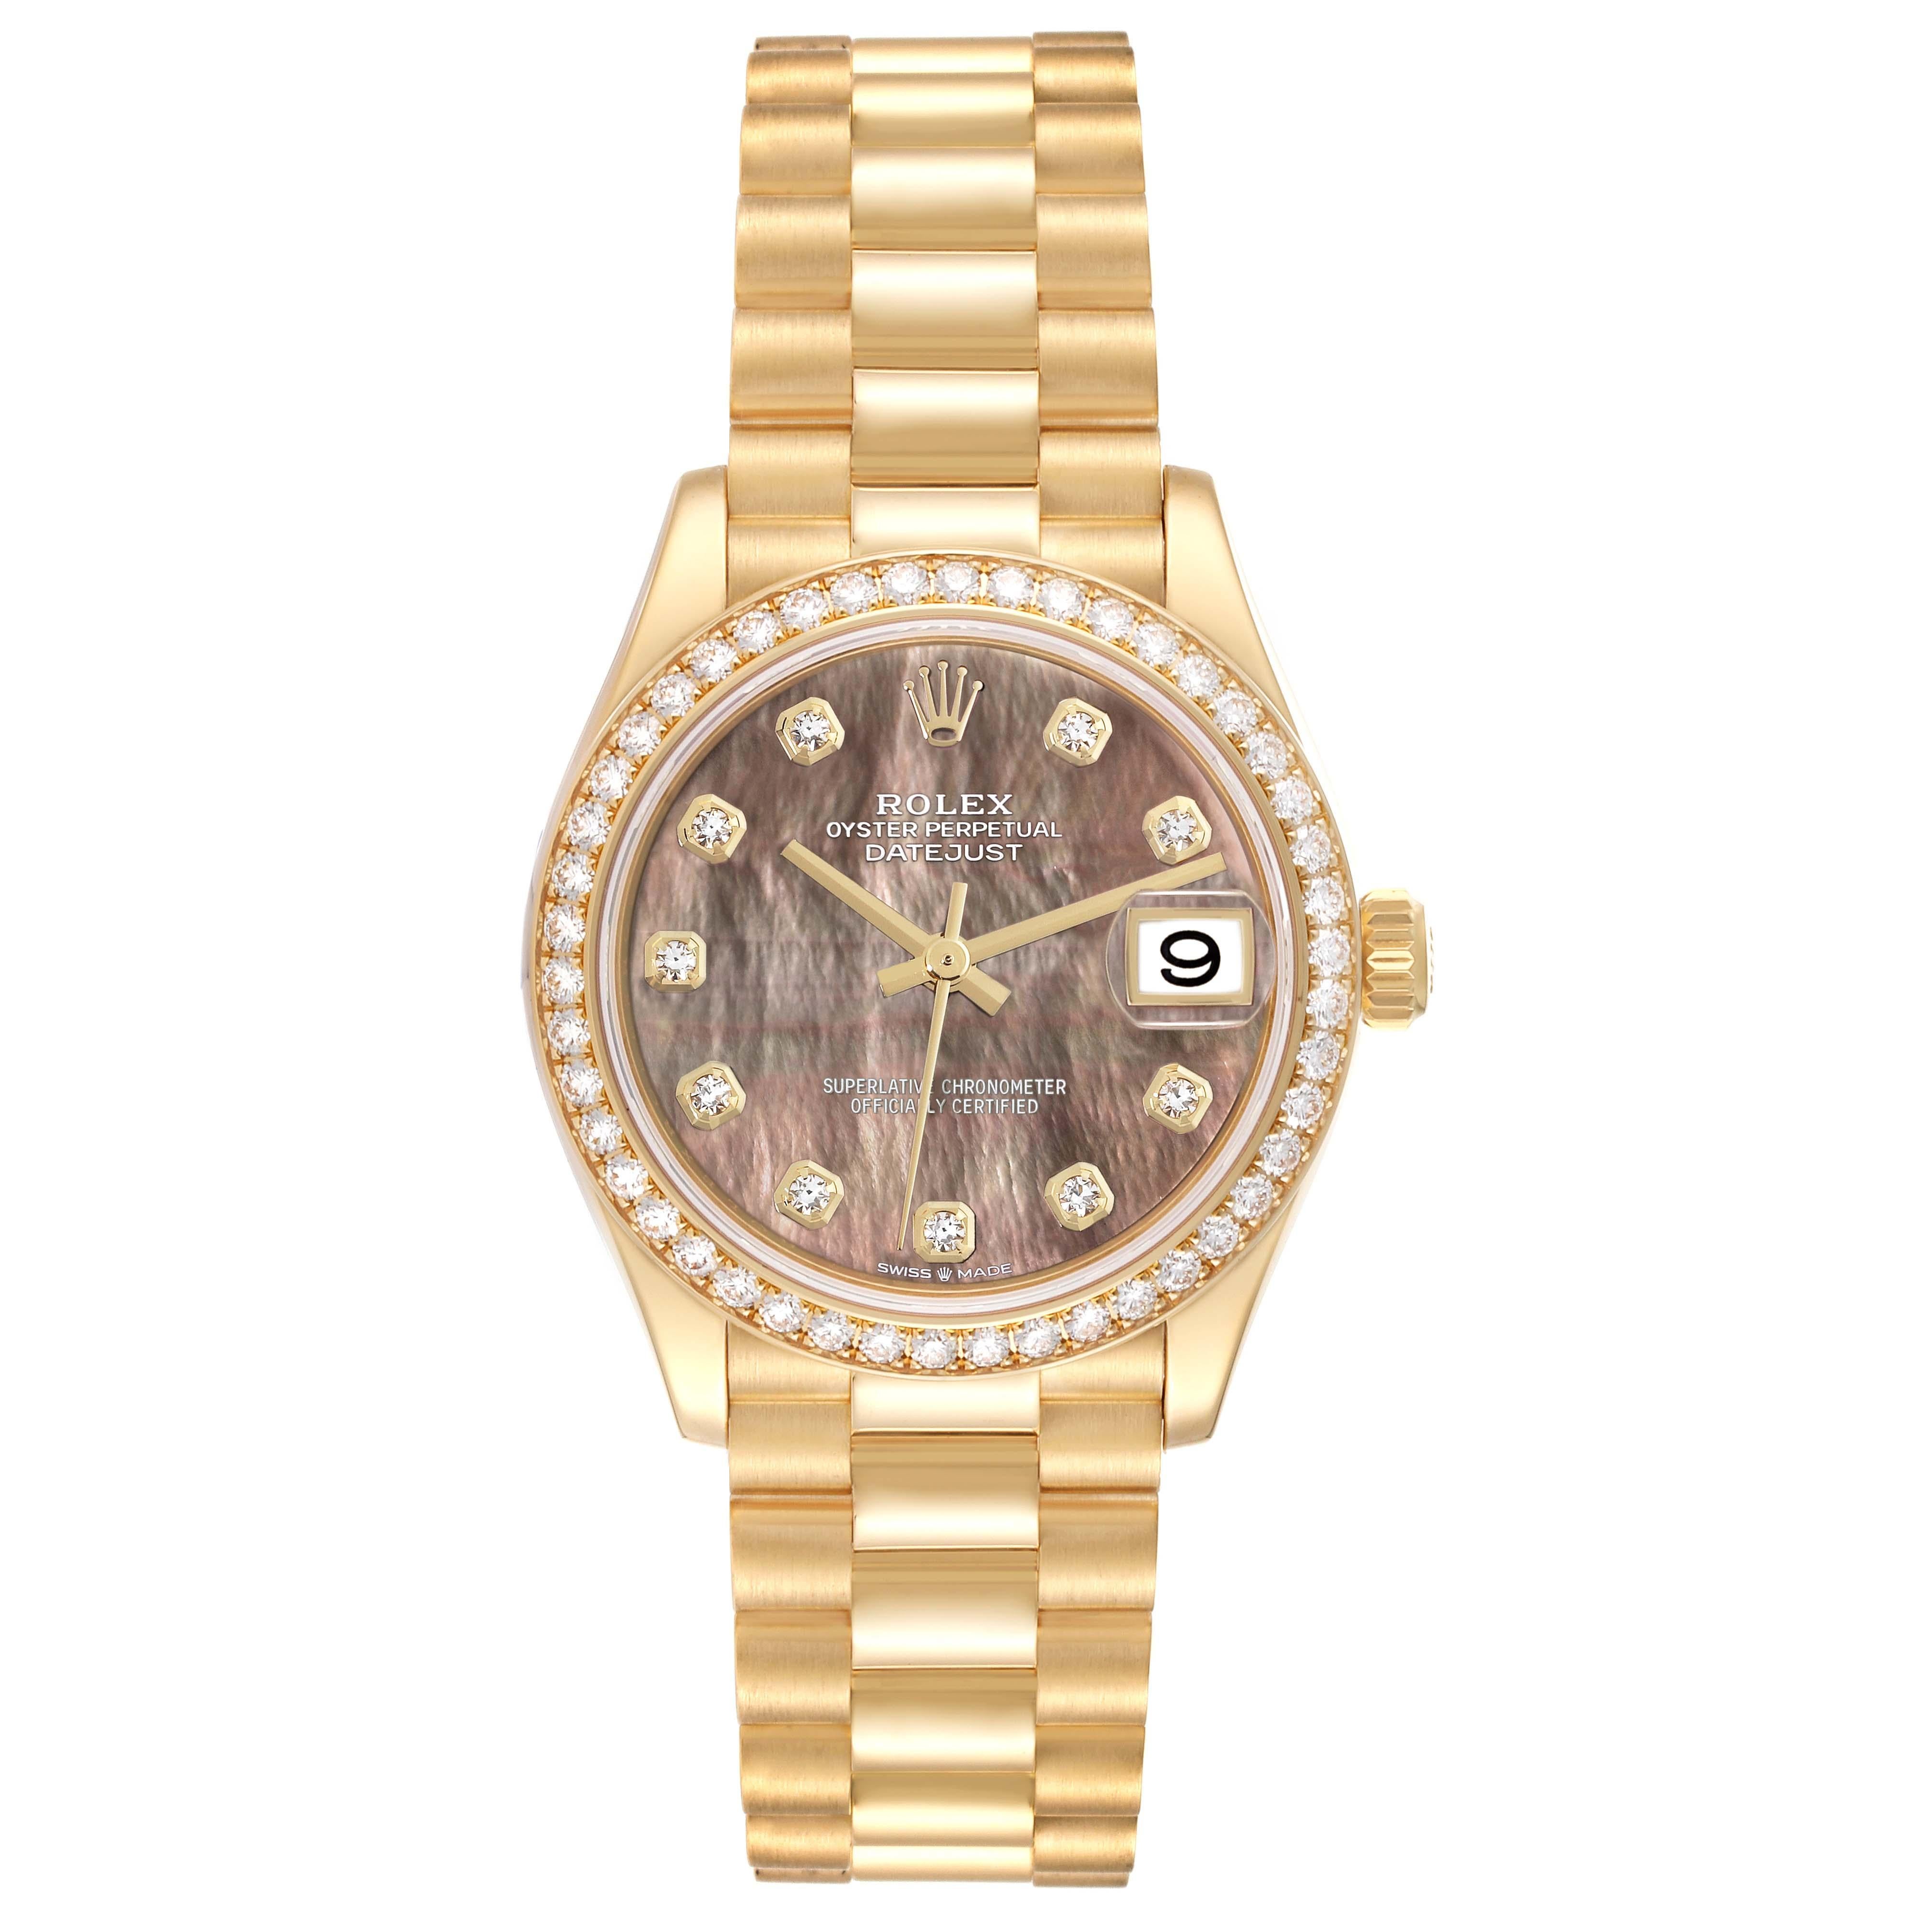 Rolex President Midsize MOP Yellow Gold Diamond Ladies Watch 278288 Box Card. Officially certified chronometer automatic self-winding movement. 18k yellow gold oyster case 31.0 mm in diameter. Rolex logo on a crown. Original Rolex factory diamond